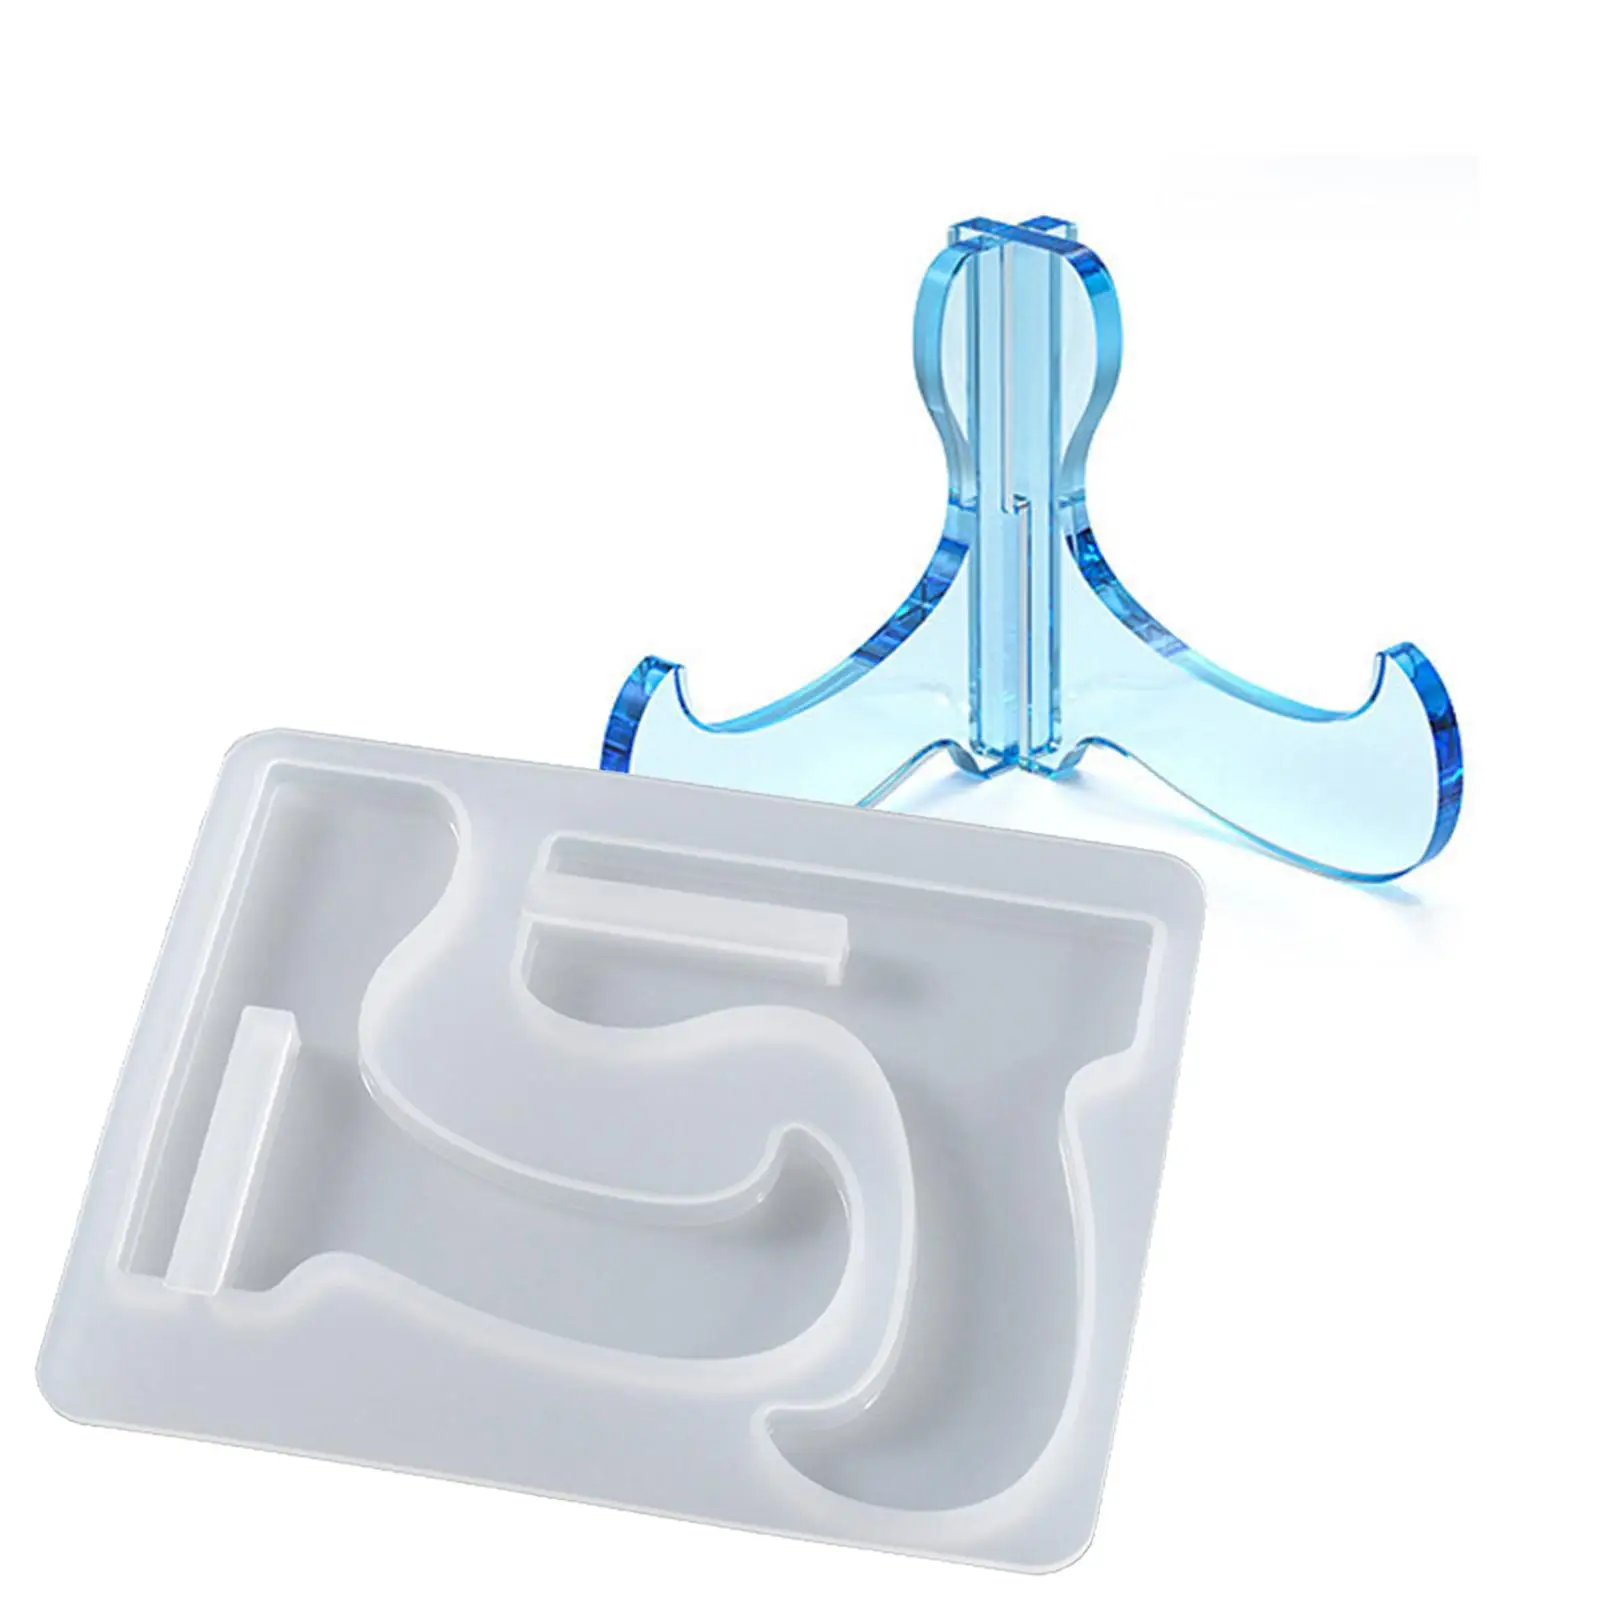 Phone Stand Resin Die, Resin Casting Phone Holder Silicone Die for DIY Craft